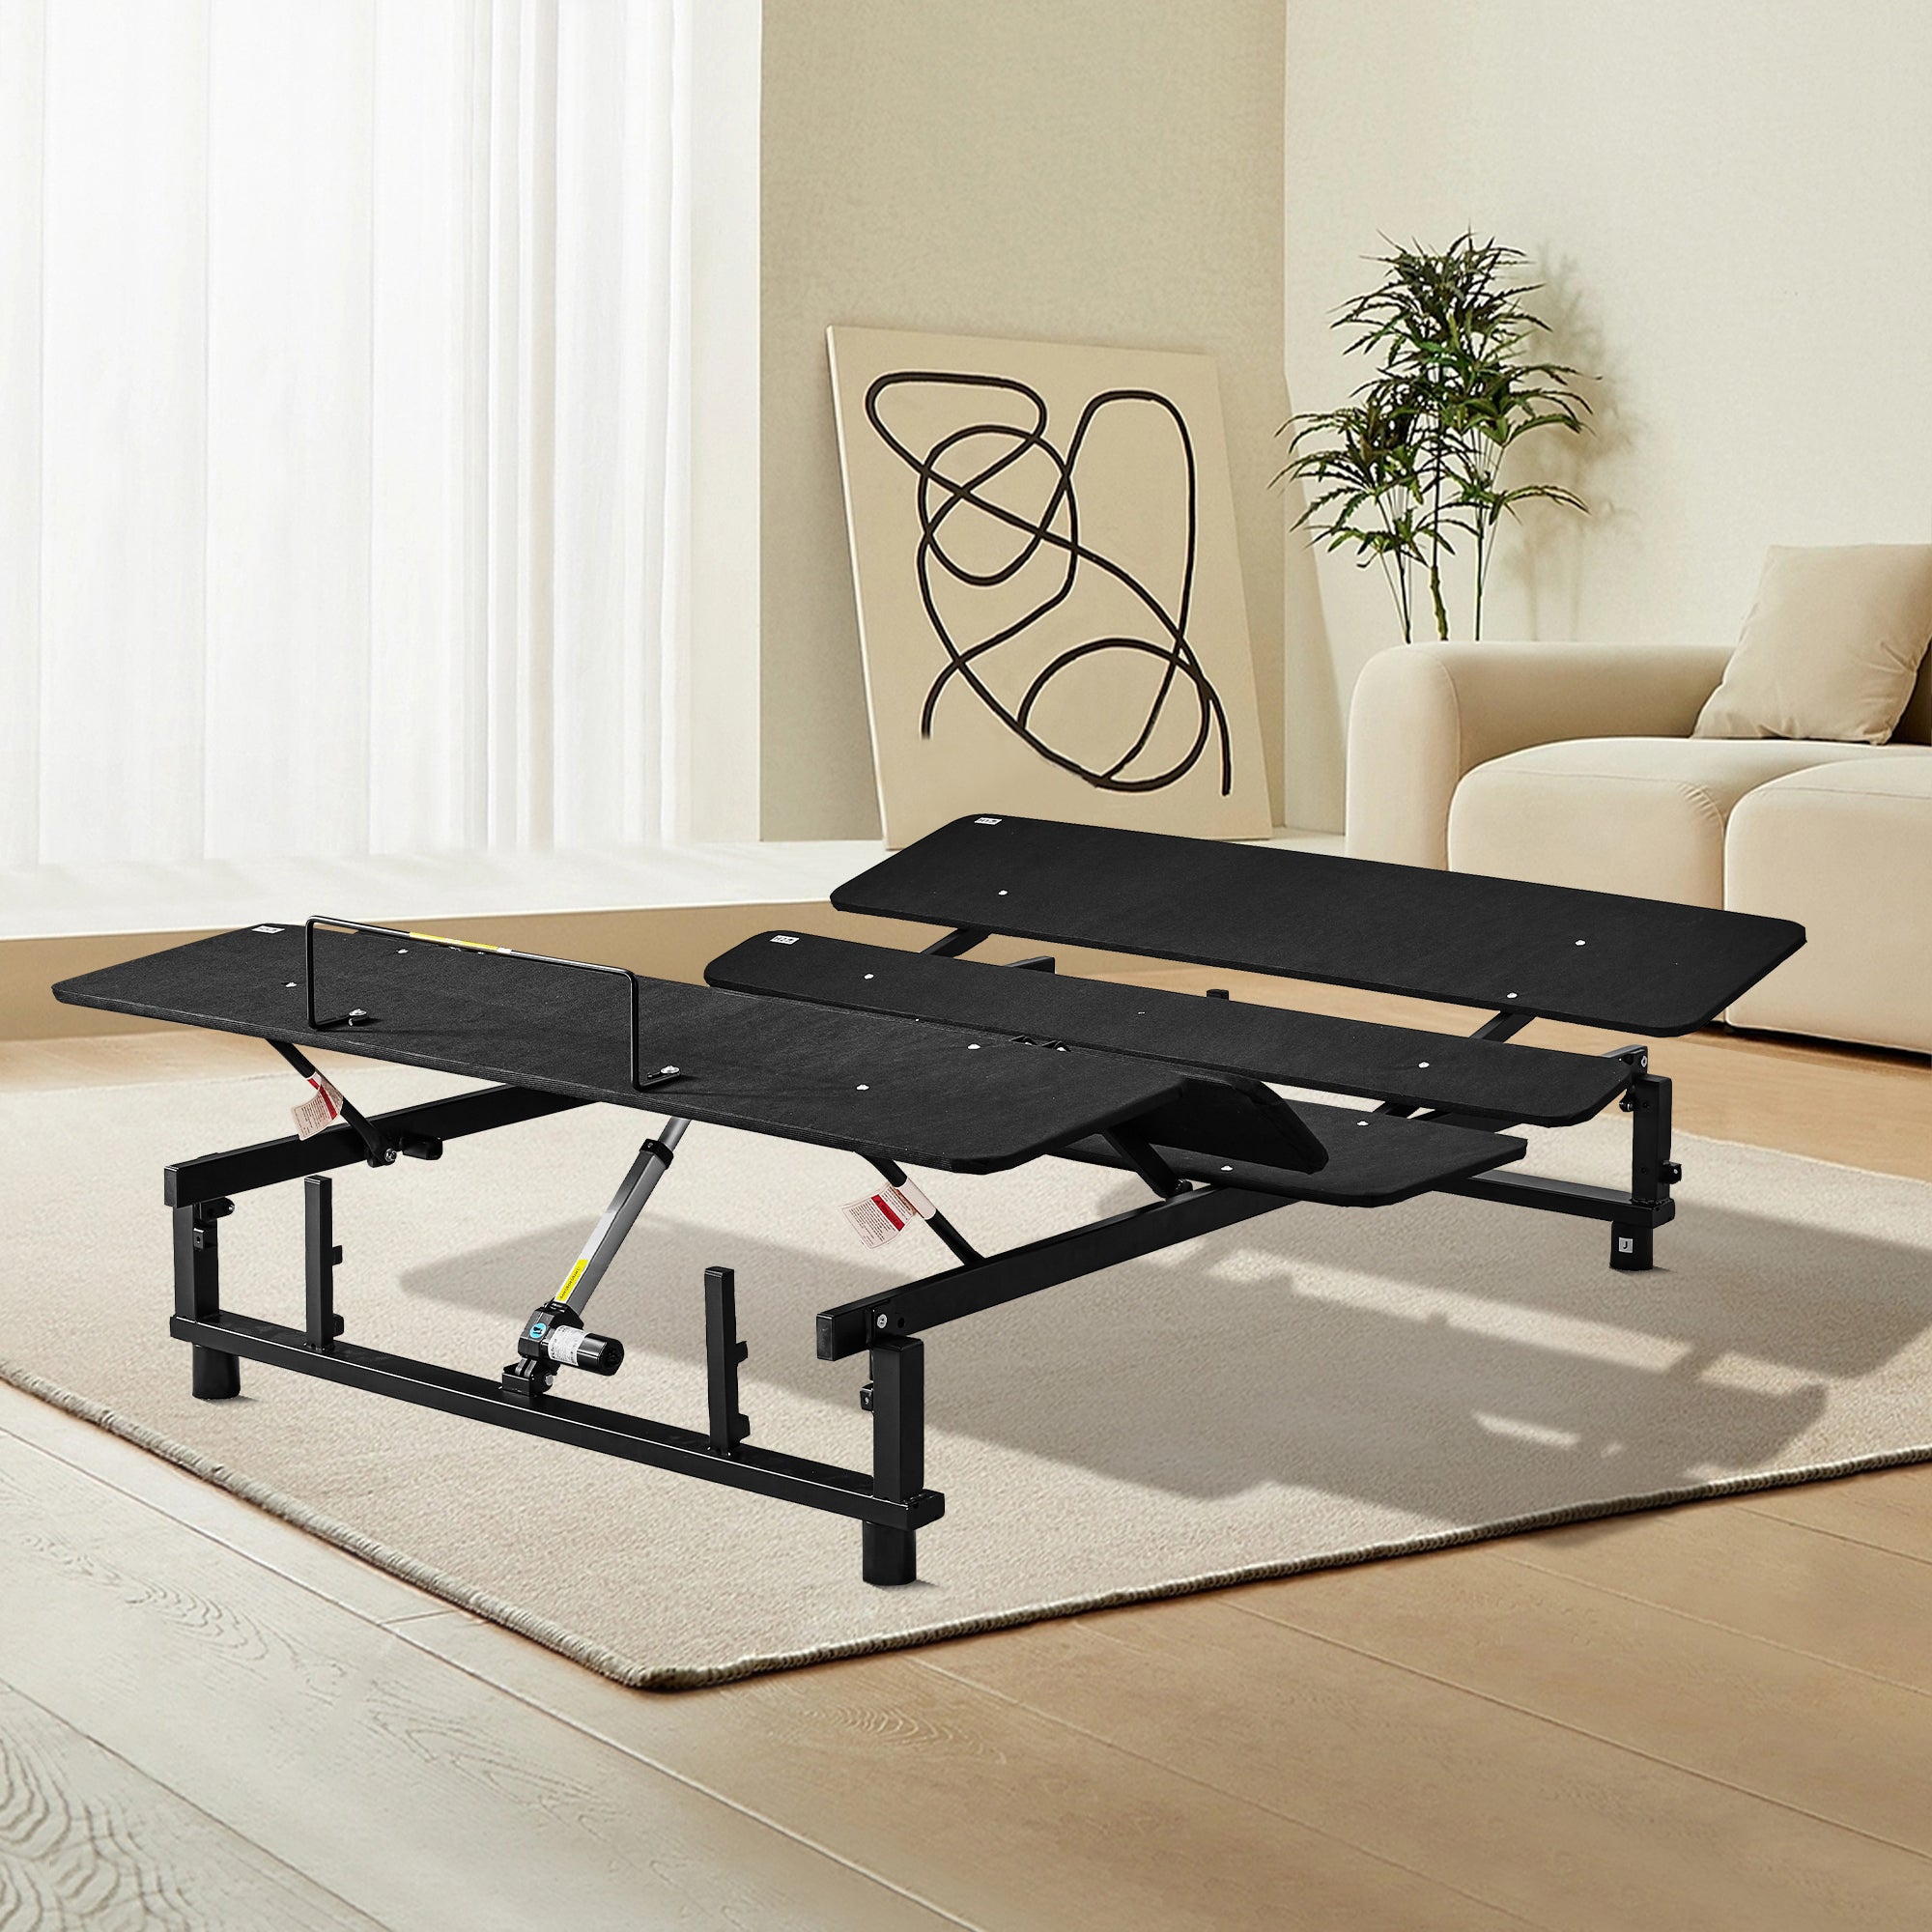 🆓🚛 Adjustable Bed Base Frame Queen Bed Frame with Head and Foot Incline, Wireless Remote Zero Gravity Quiet Motor, Black